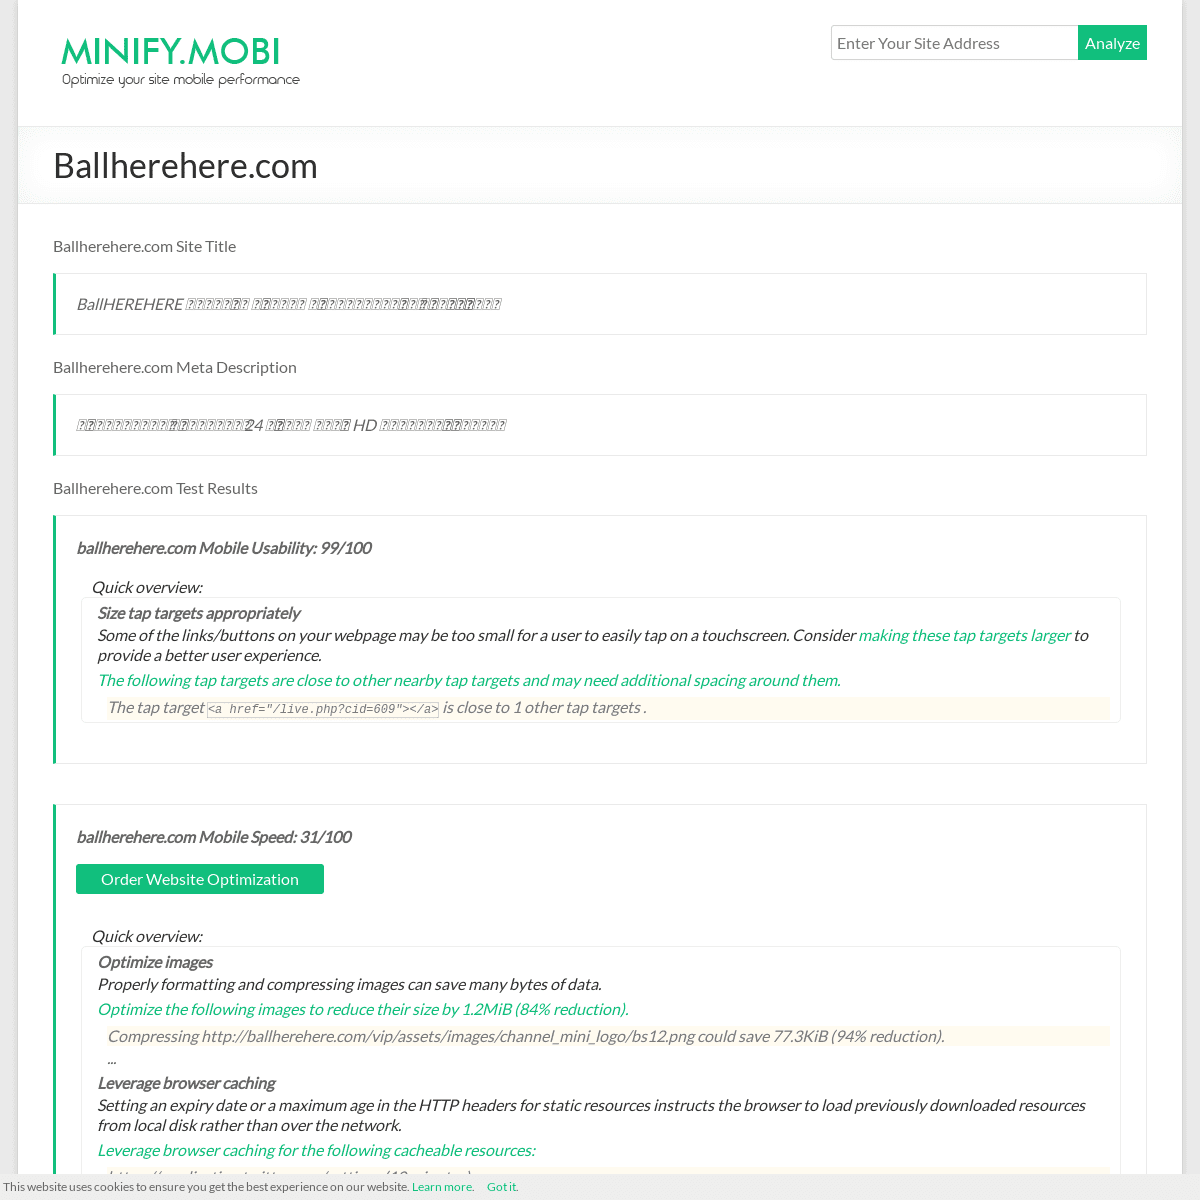 A complete backup of https://minify.mobi/results/ballherehere.com